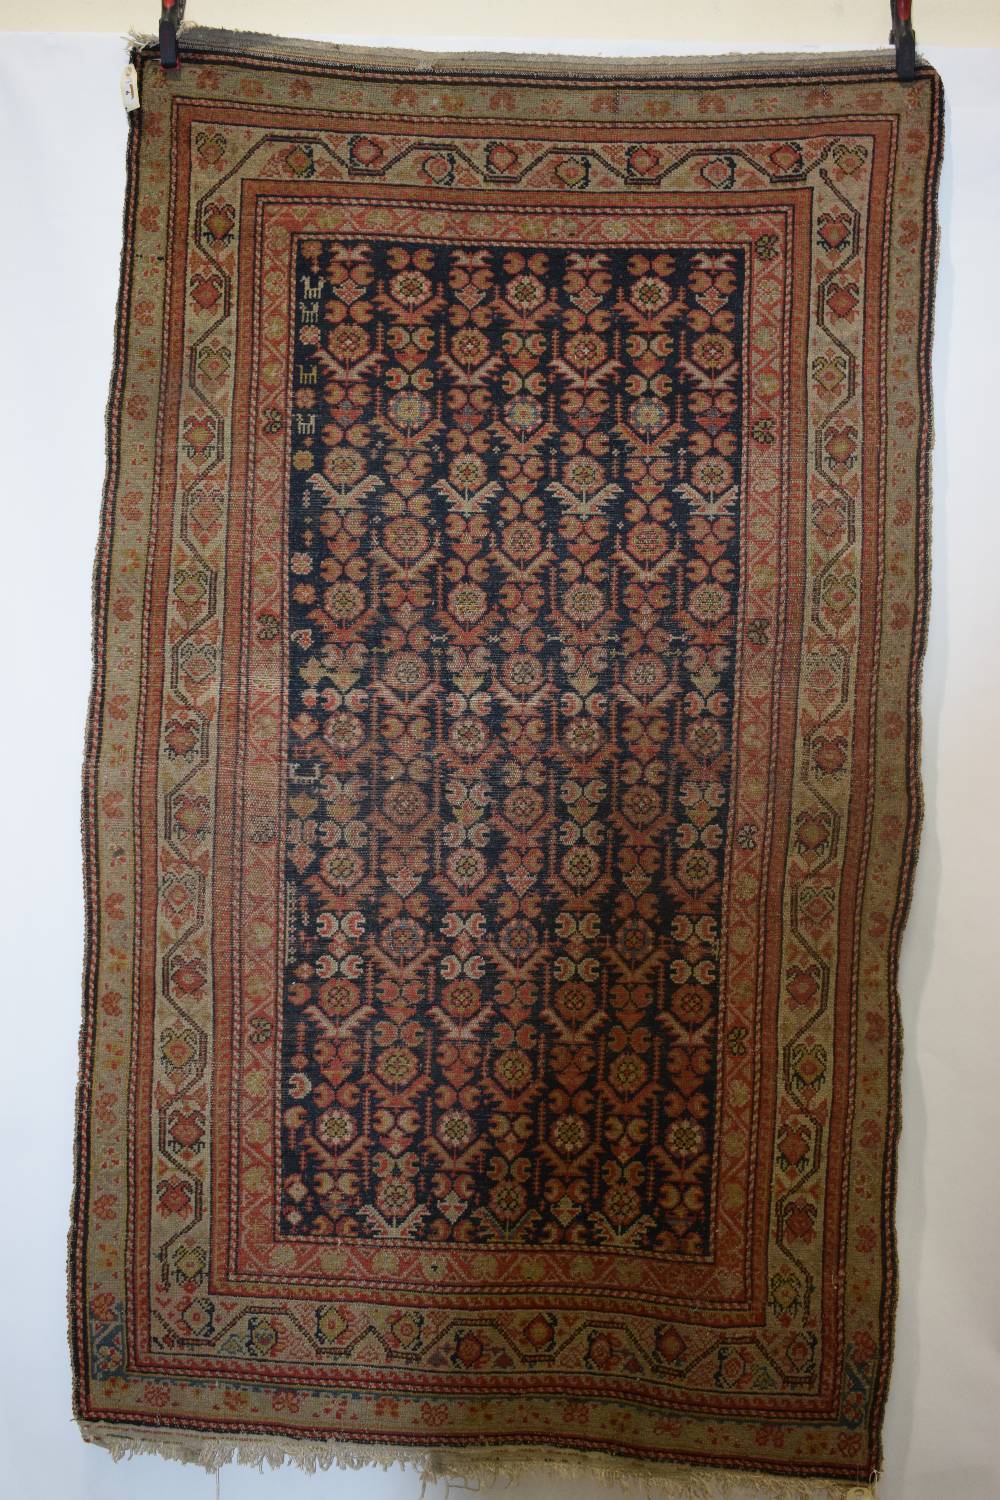 Two Hamadan rugs, north west Persia, circa 1920s-30s, the first with vertical floral stripes and - Image 11 of 18